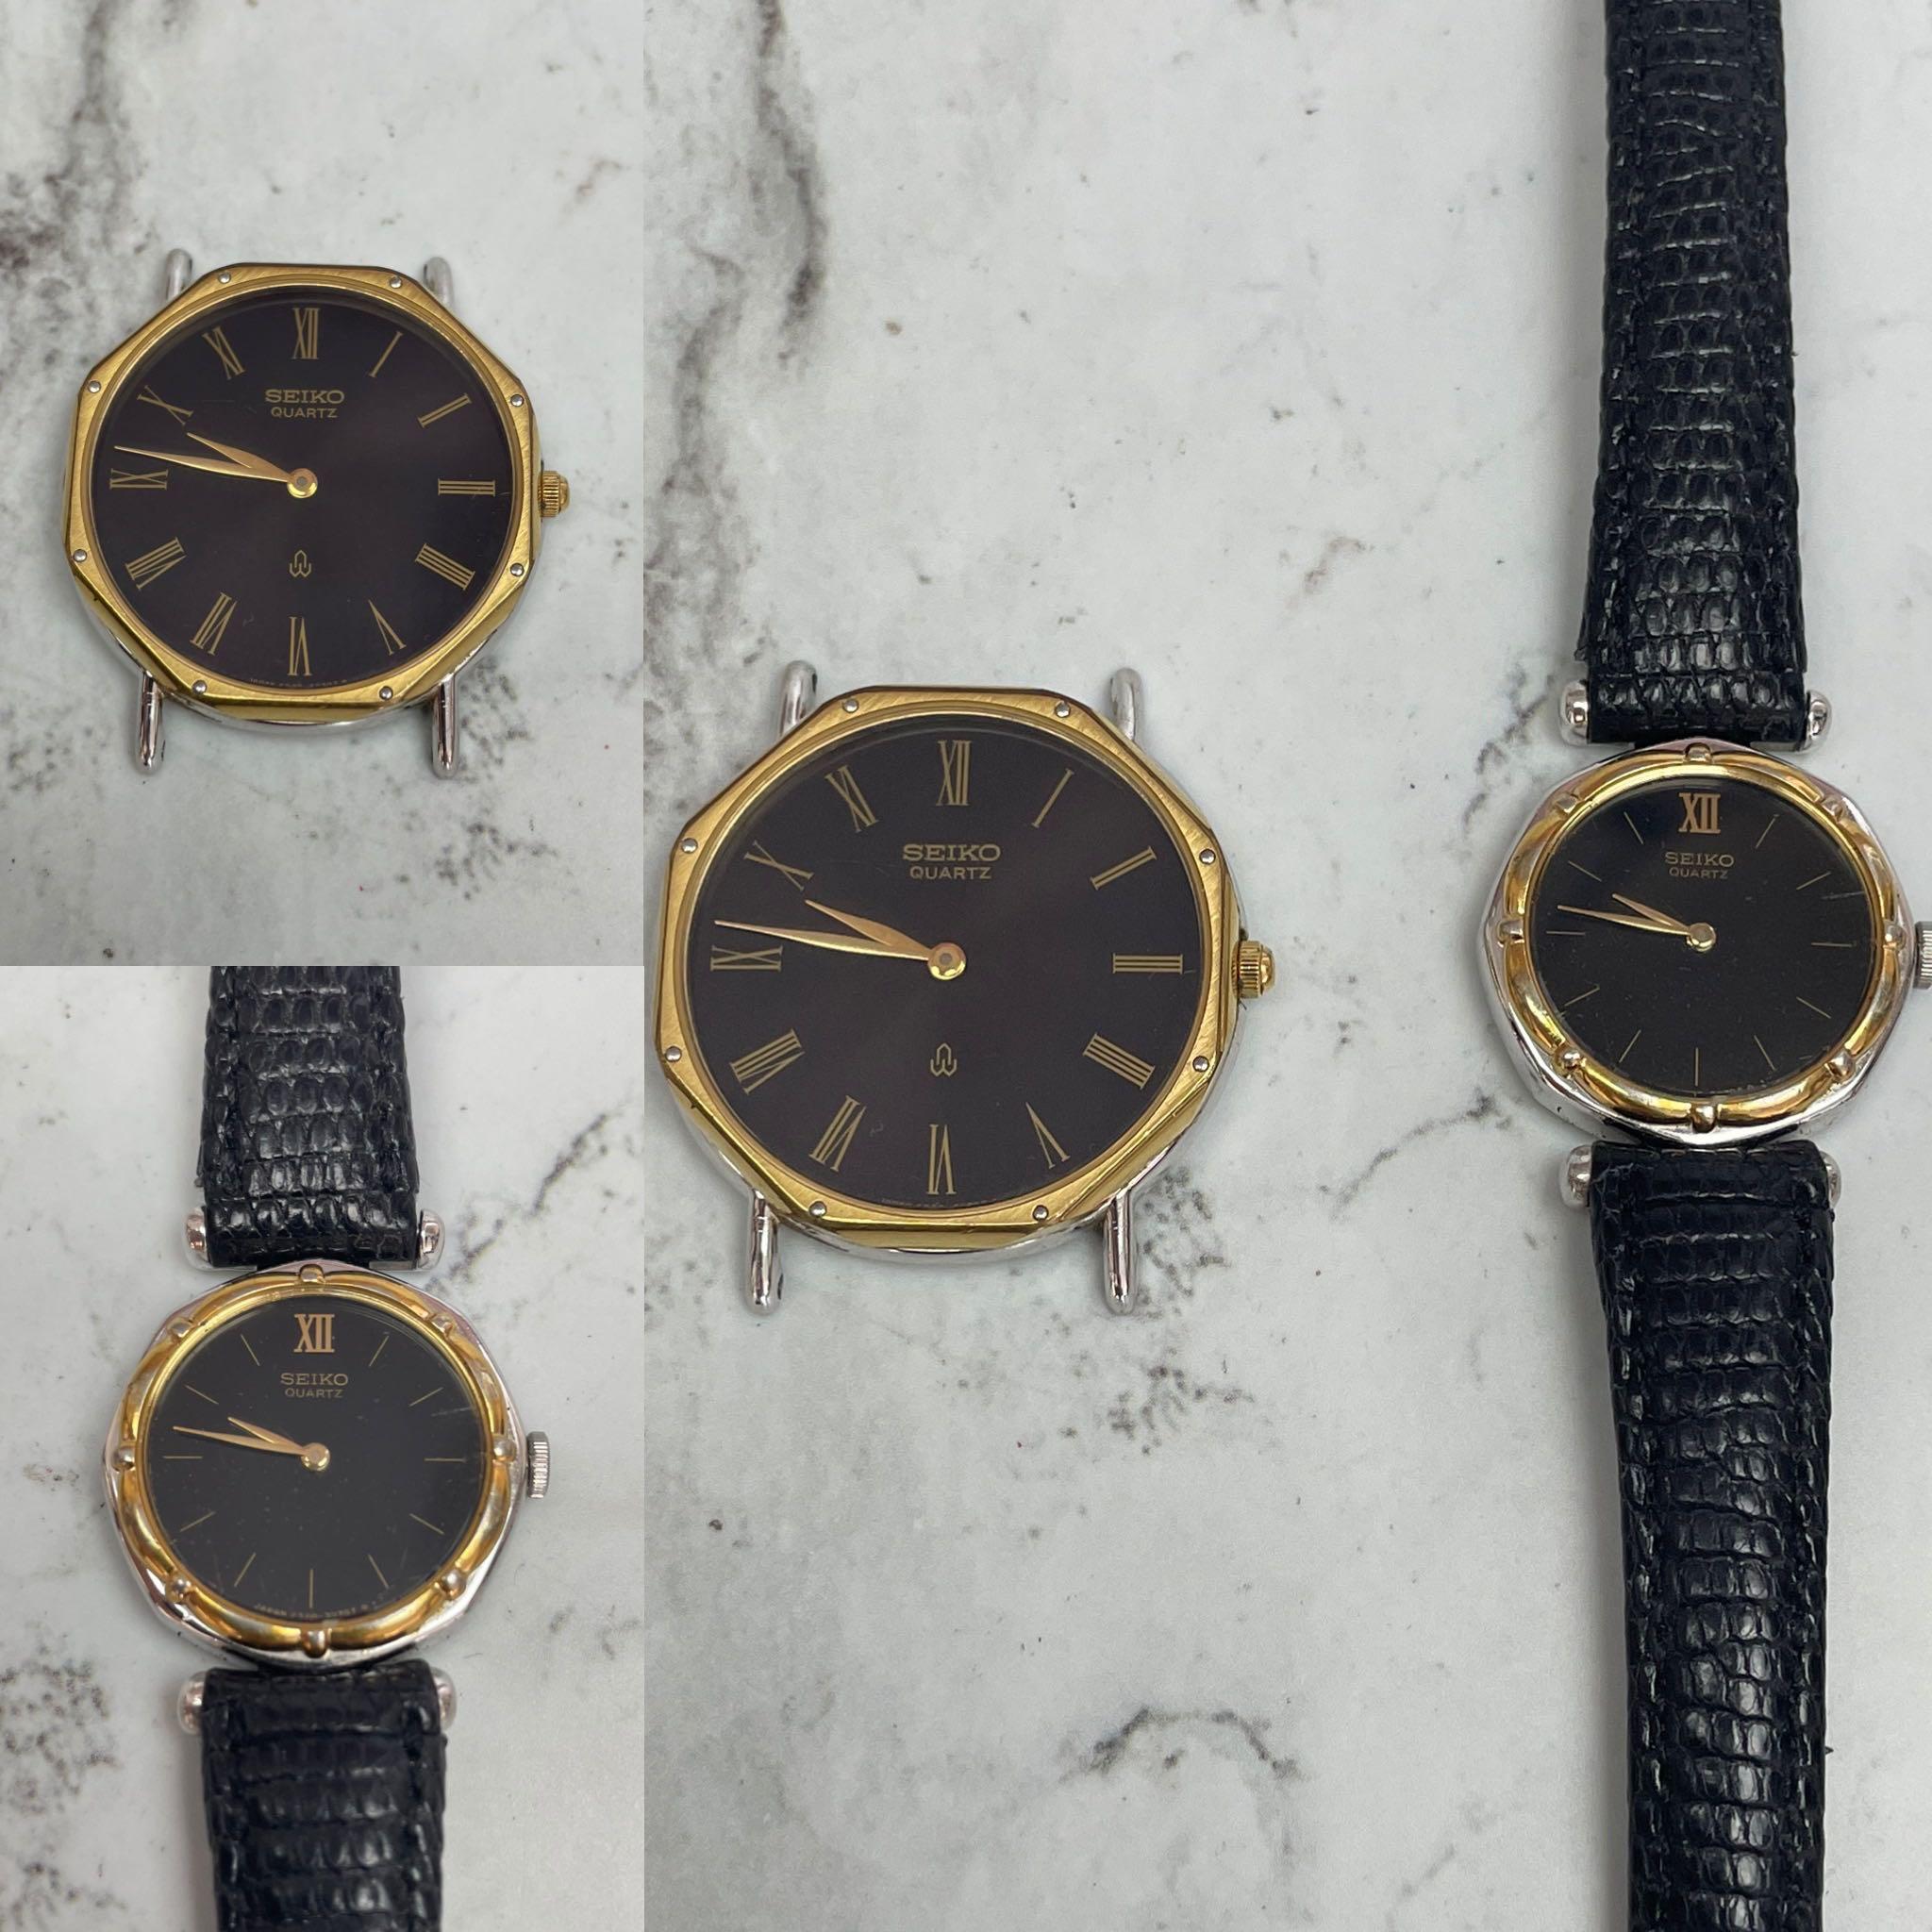 210137e) Seiko Vintage Men's and Women's (Sold) Quartz Watches Circa 1980/90s,  Men's Fashion, Watches & Accessories, Watches on Carousell